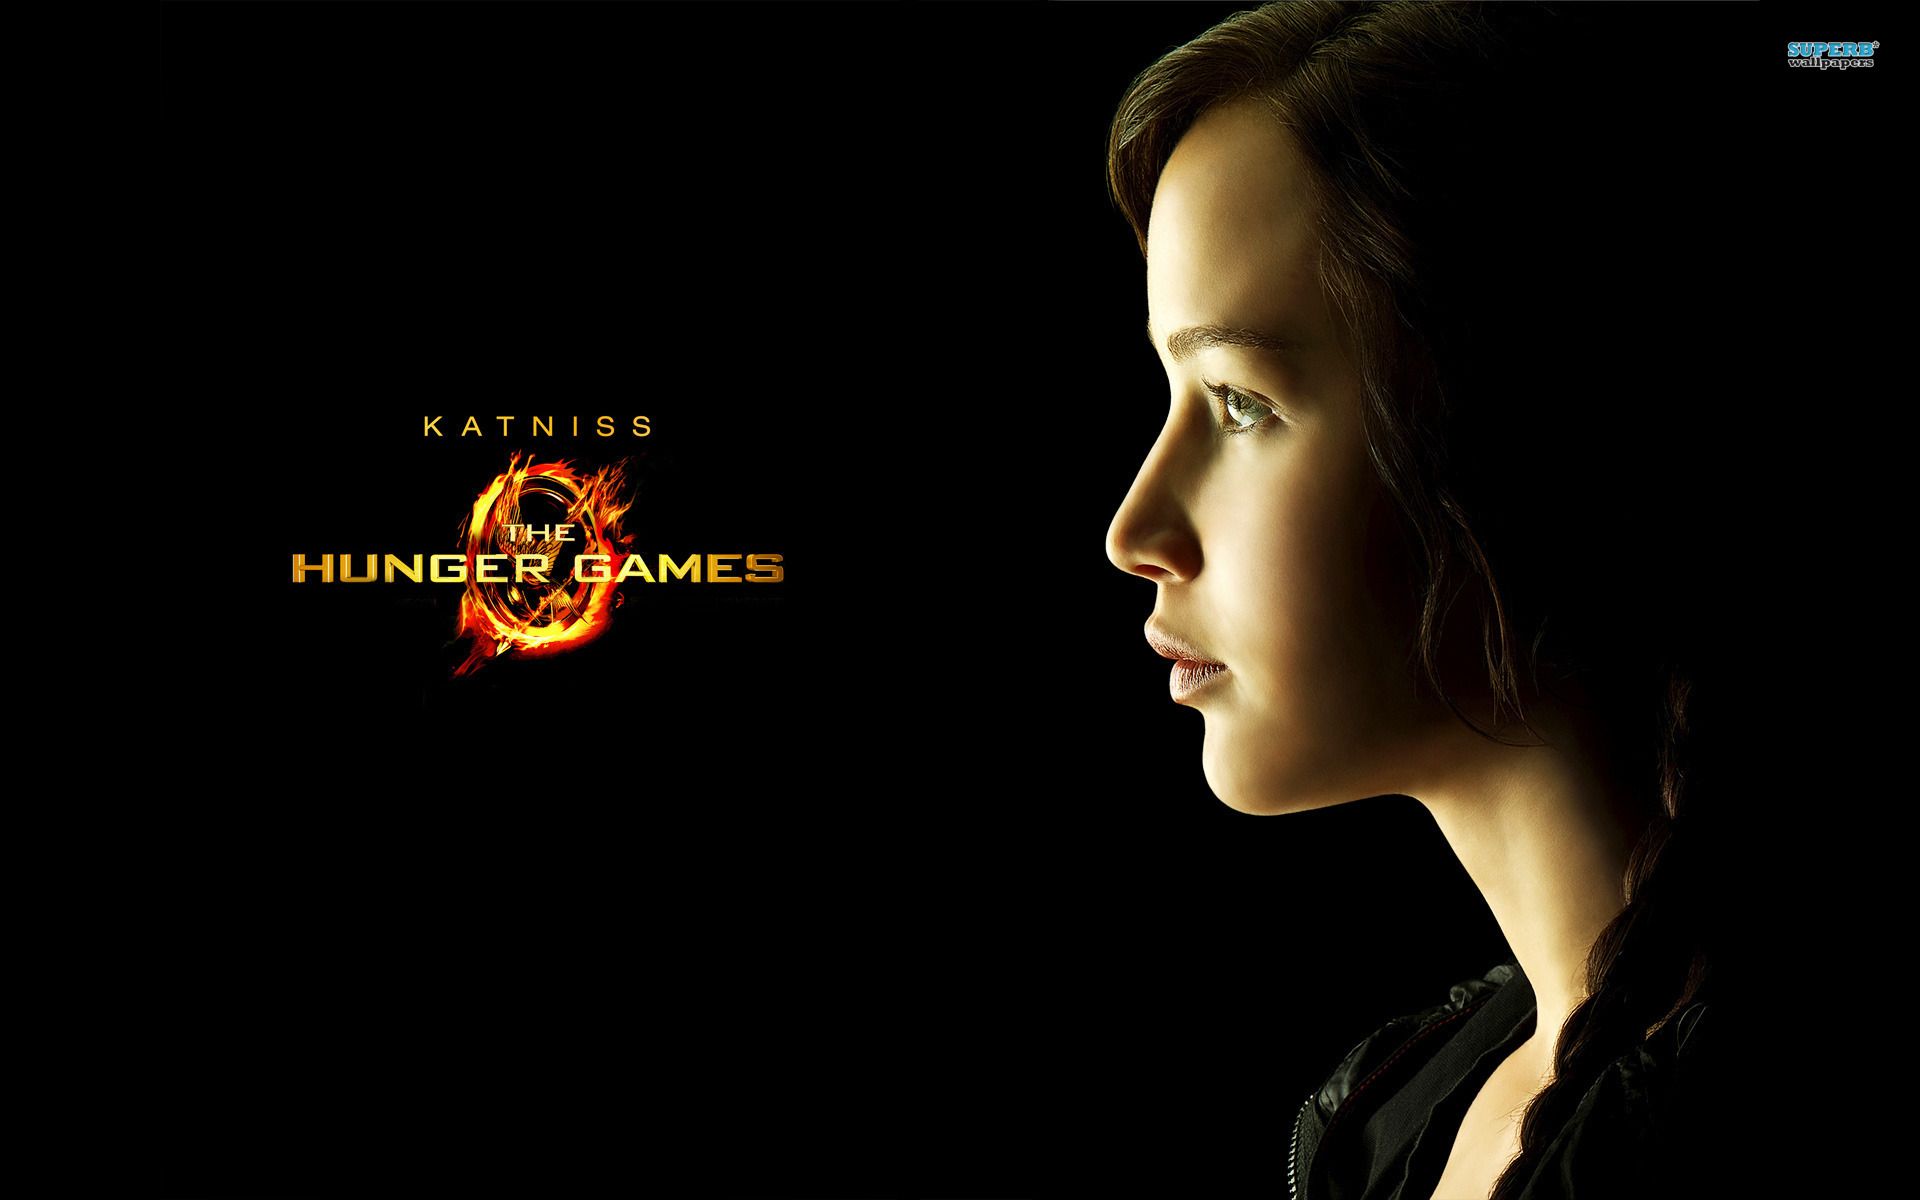 The Hunger Games wallpapers